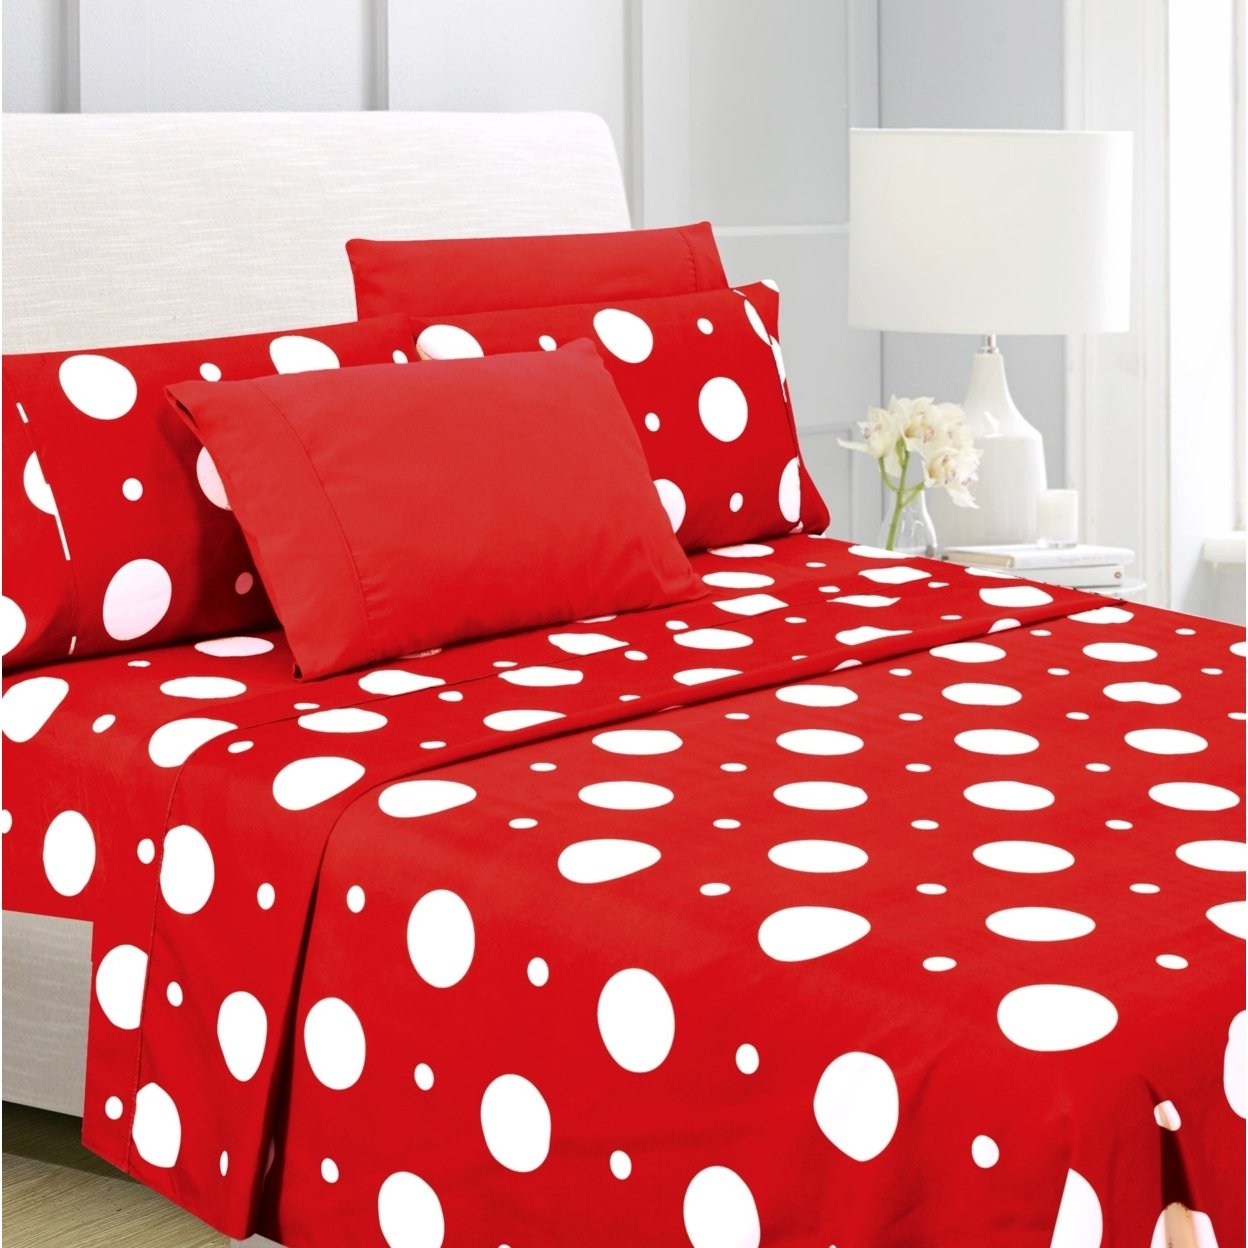 American Home Collection Ultra Soft 4-6 Piece Polka Dot Printed Bed Sheet Set - Queen, Red